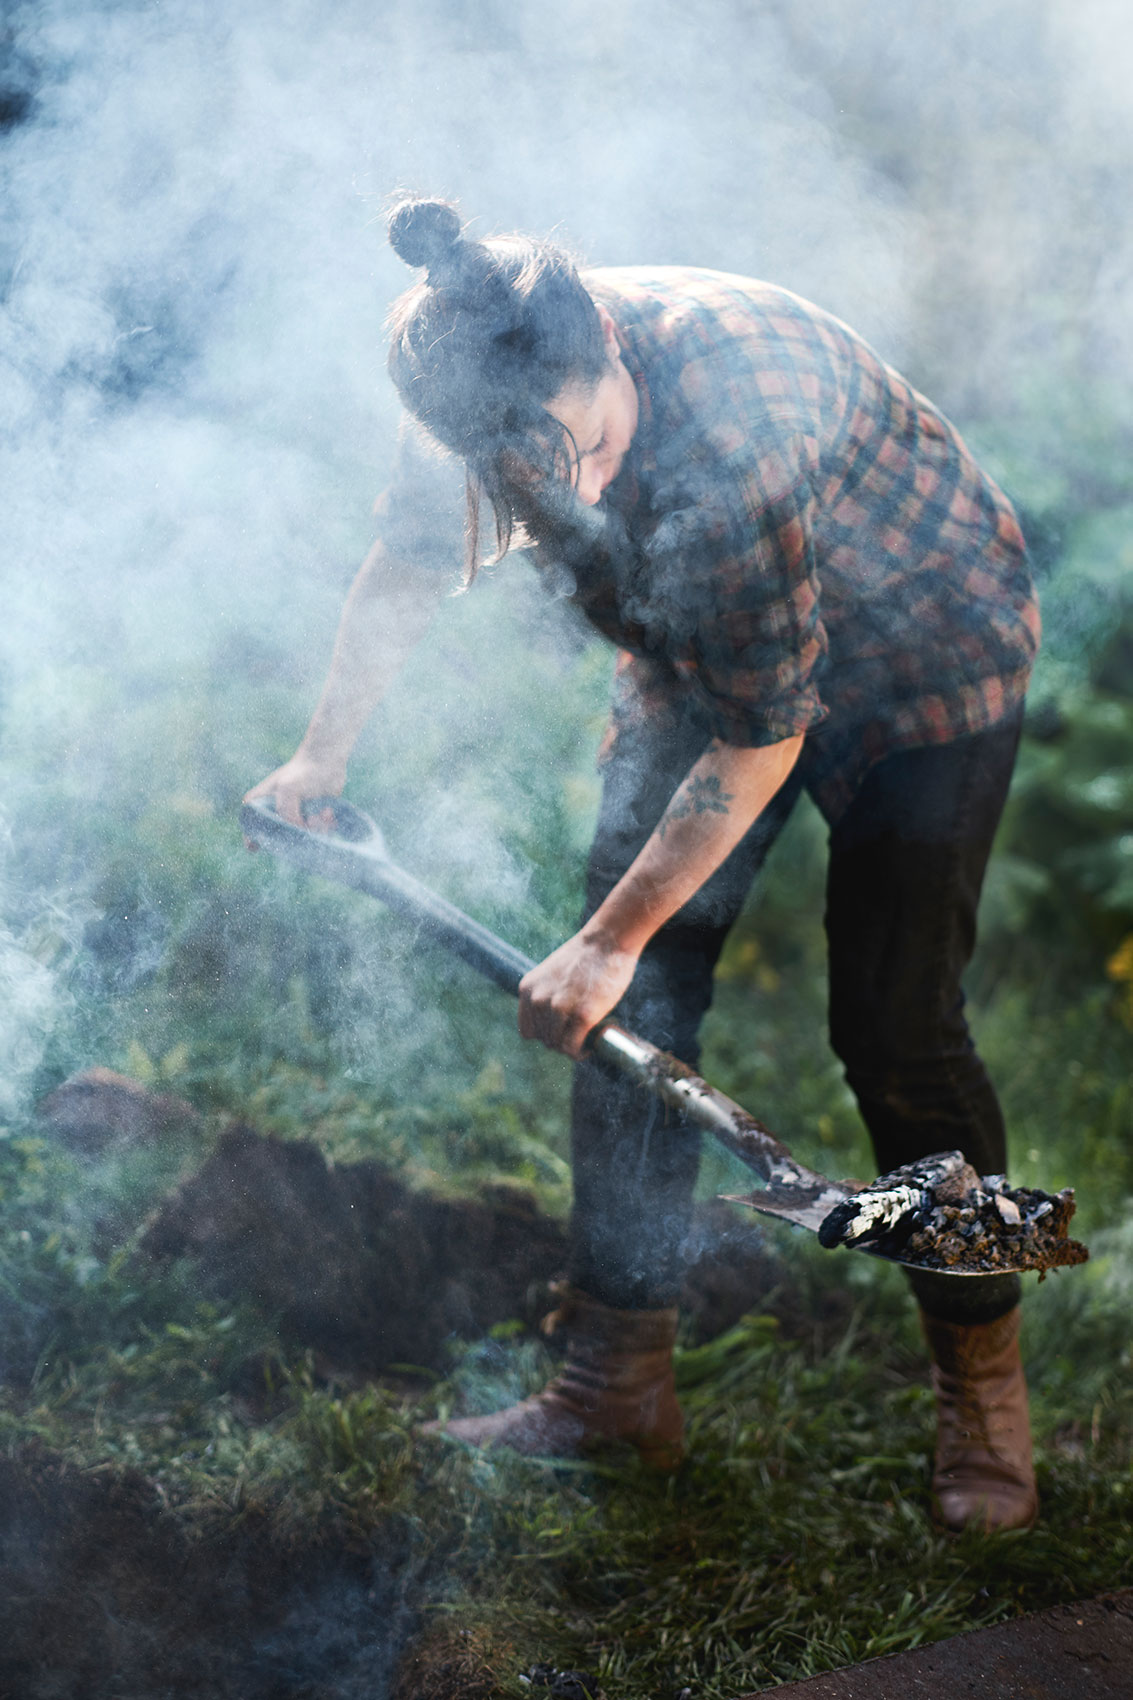 Hiakai • Monique Fiso Digging Up A Hangi Surounded by Smoke • Lifestyle & Hospitality Food Photography